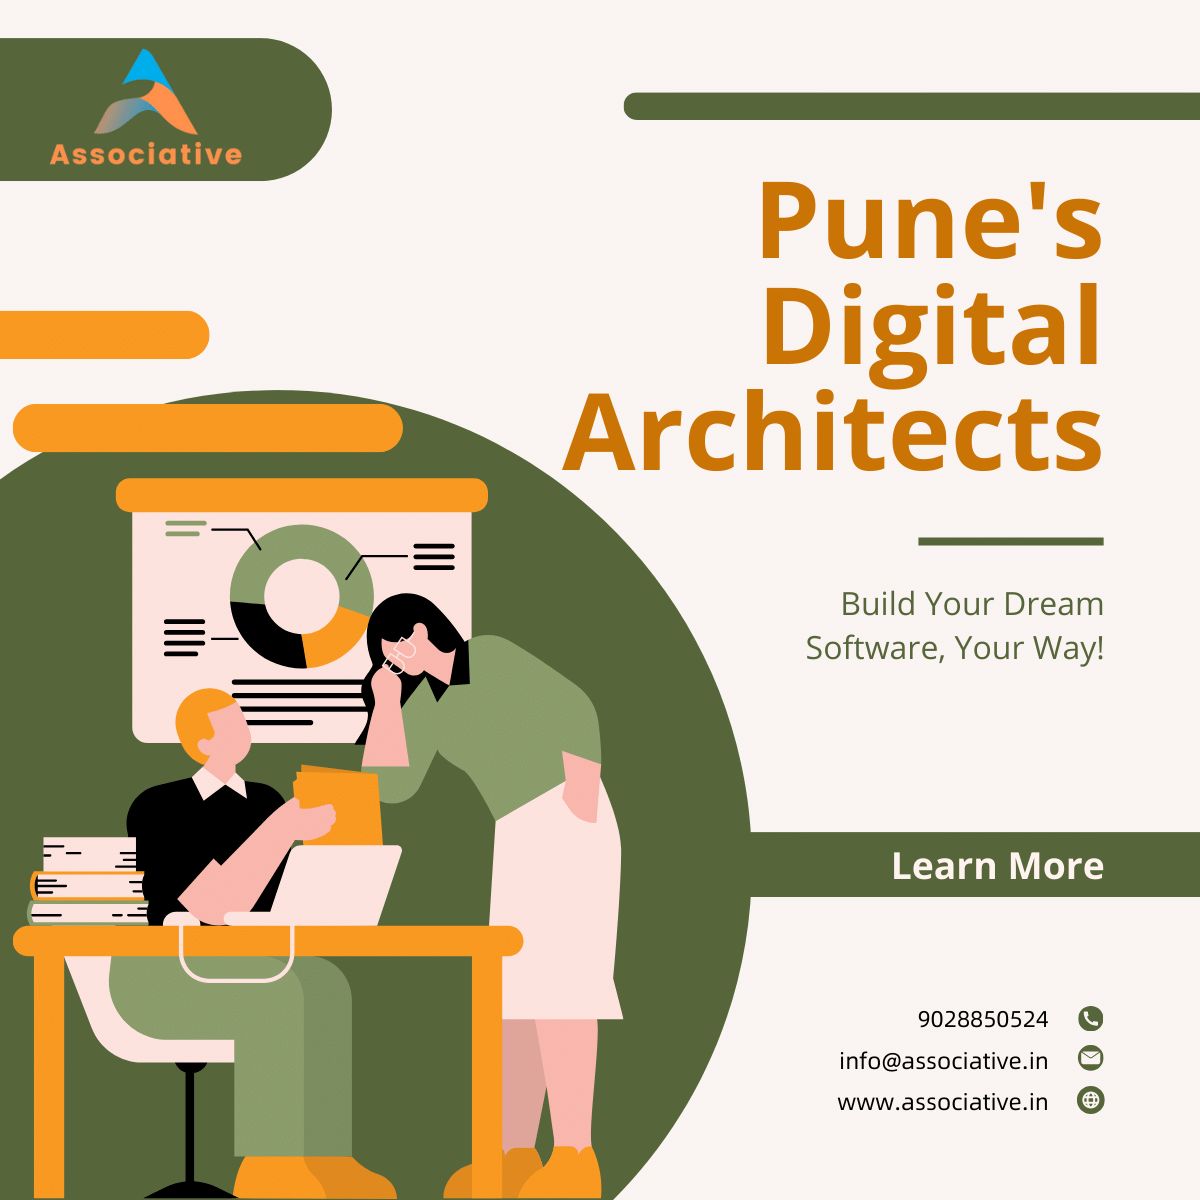 Pune's Digital Architects: Build Your Dream Software, Your Way!